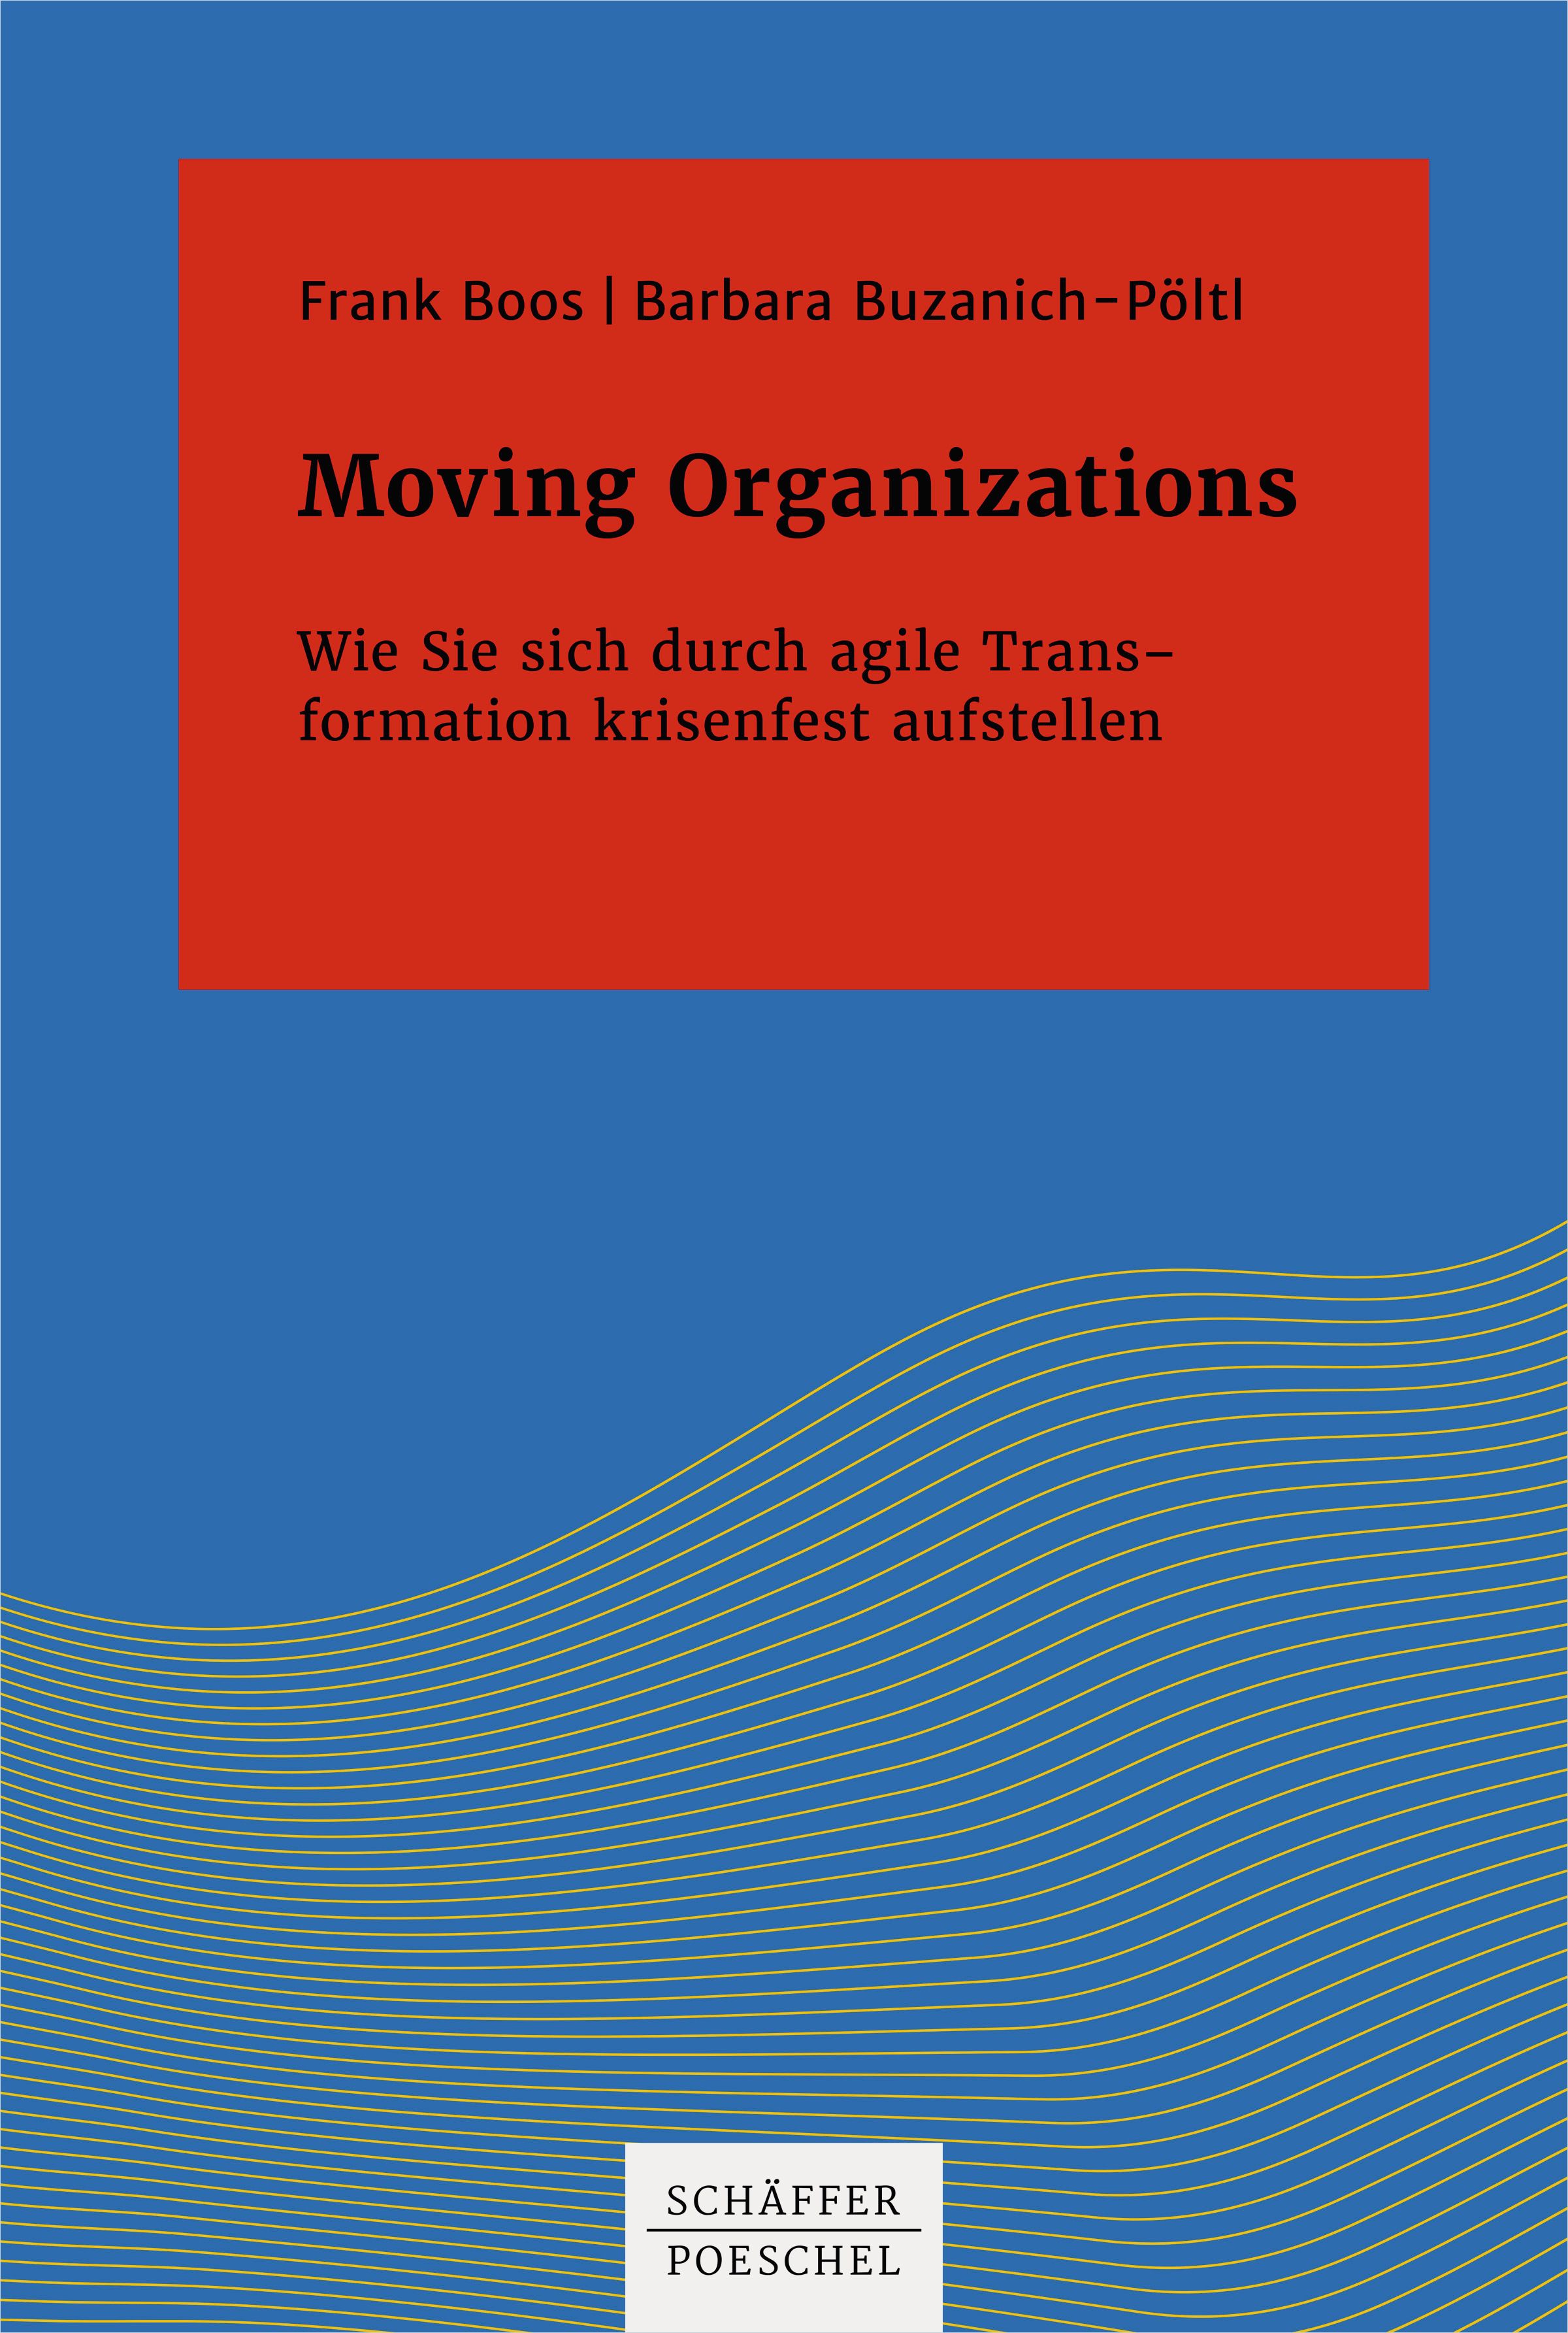 Image of: Moving Organizations